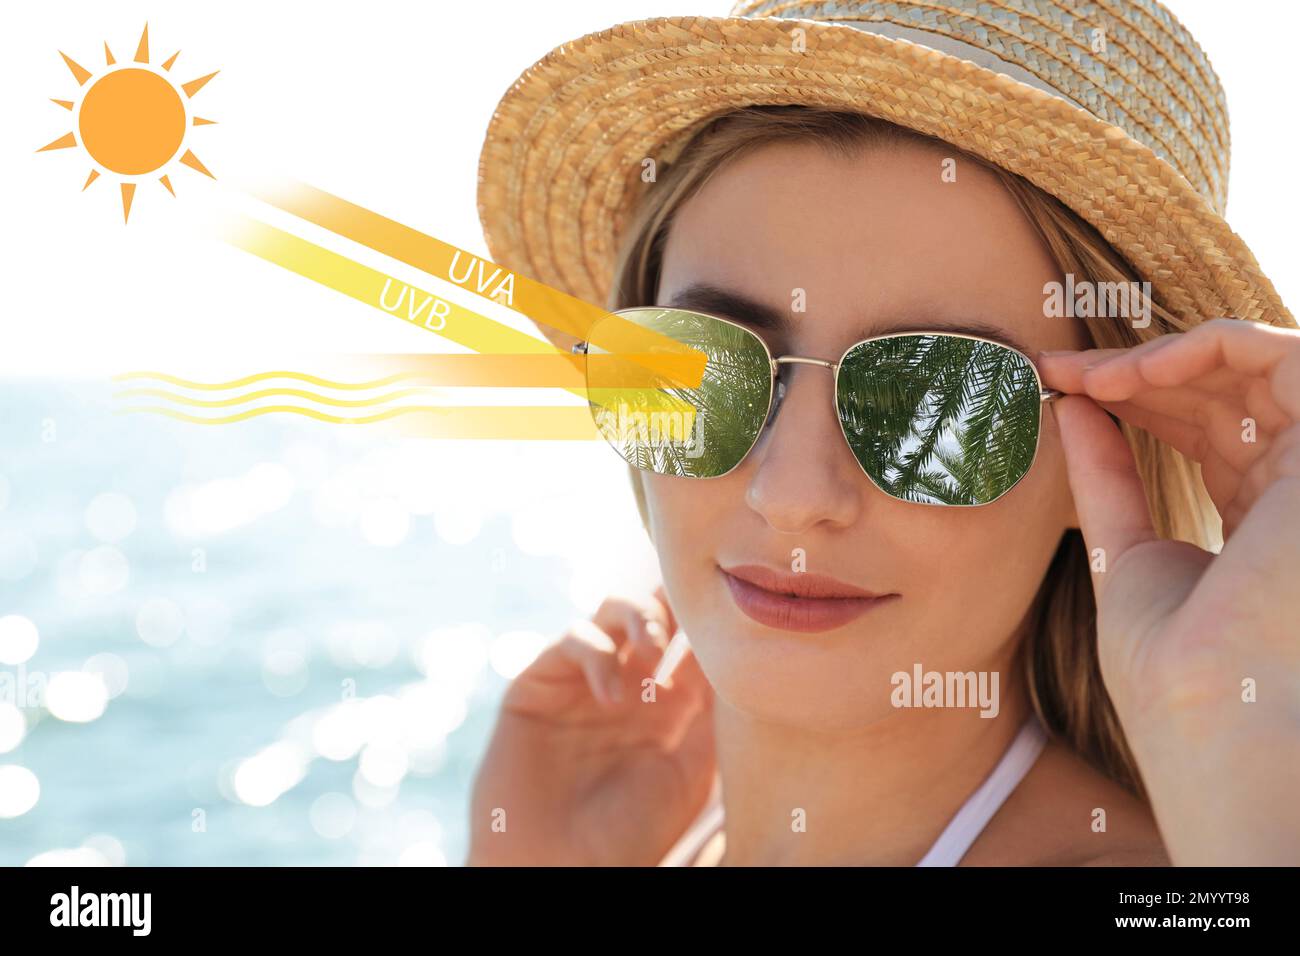 Woman wearing sunglasses near sea. UVA and UVB rays reflected by lenses, illustration Stock Photo